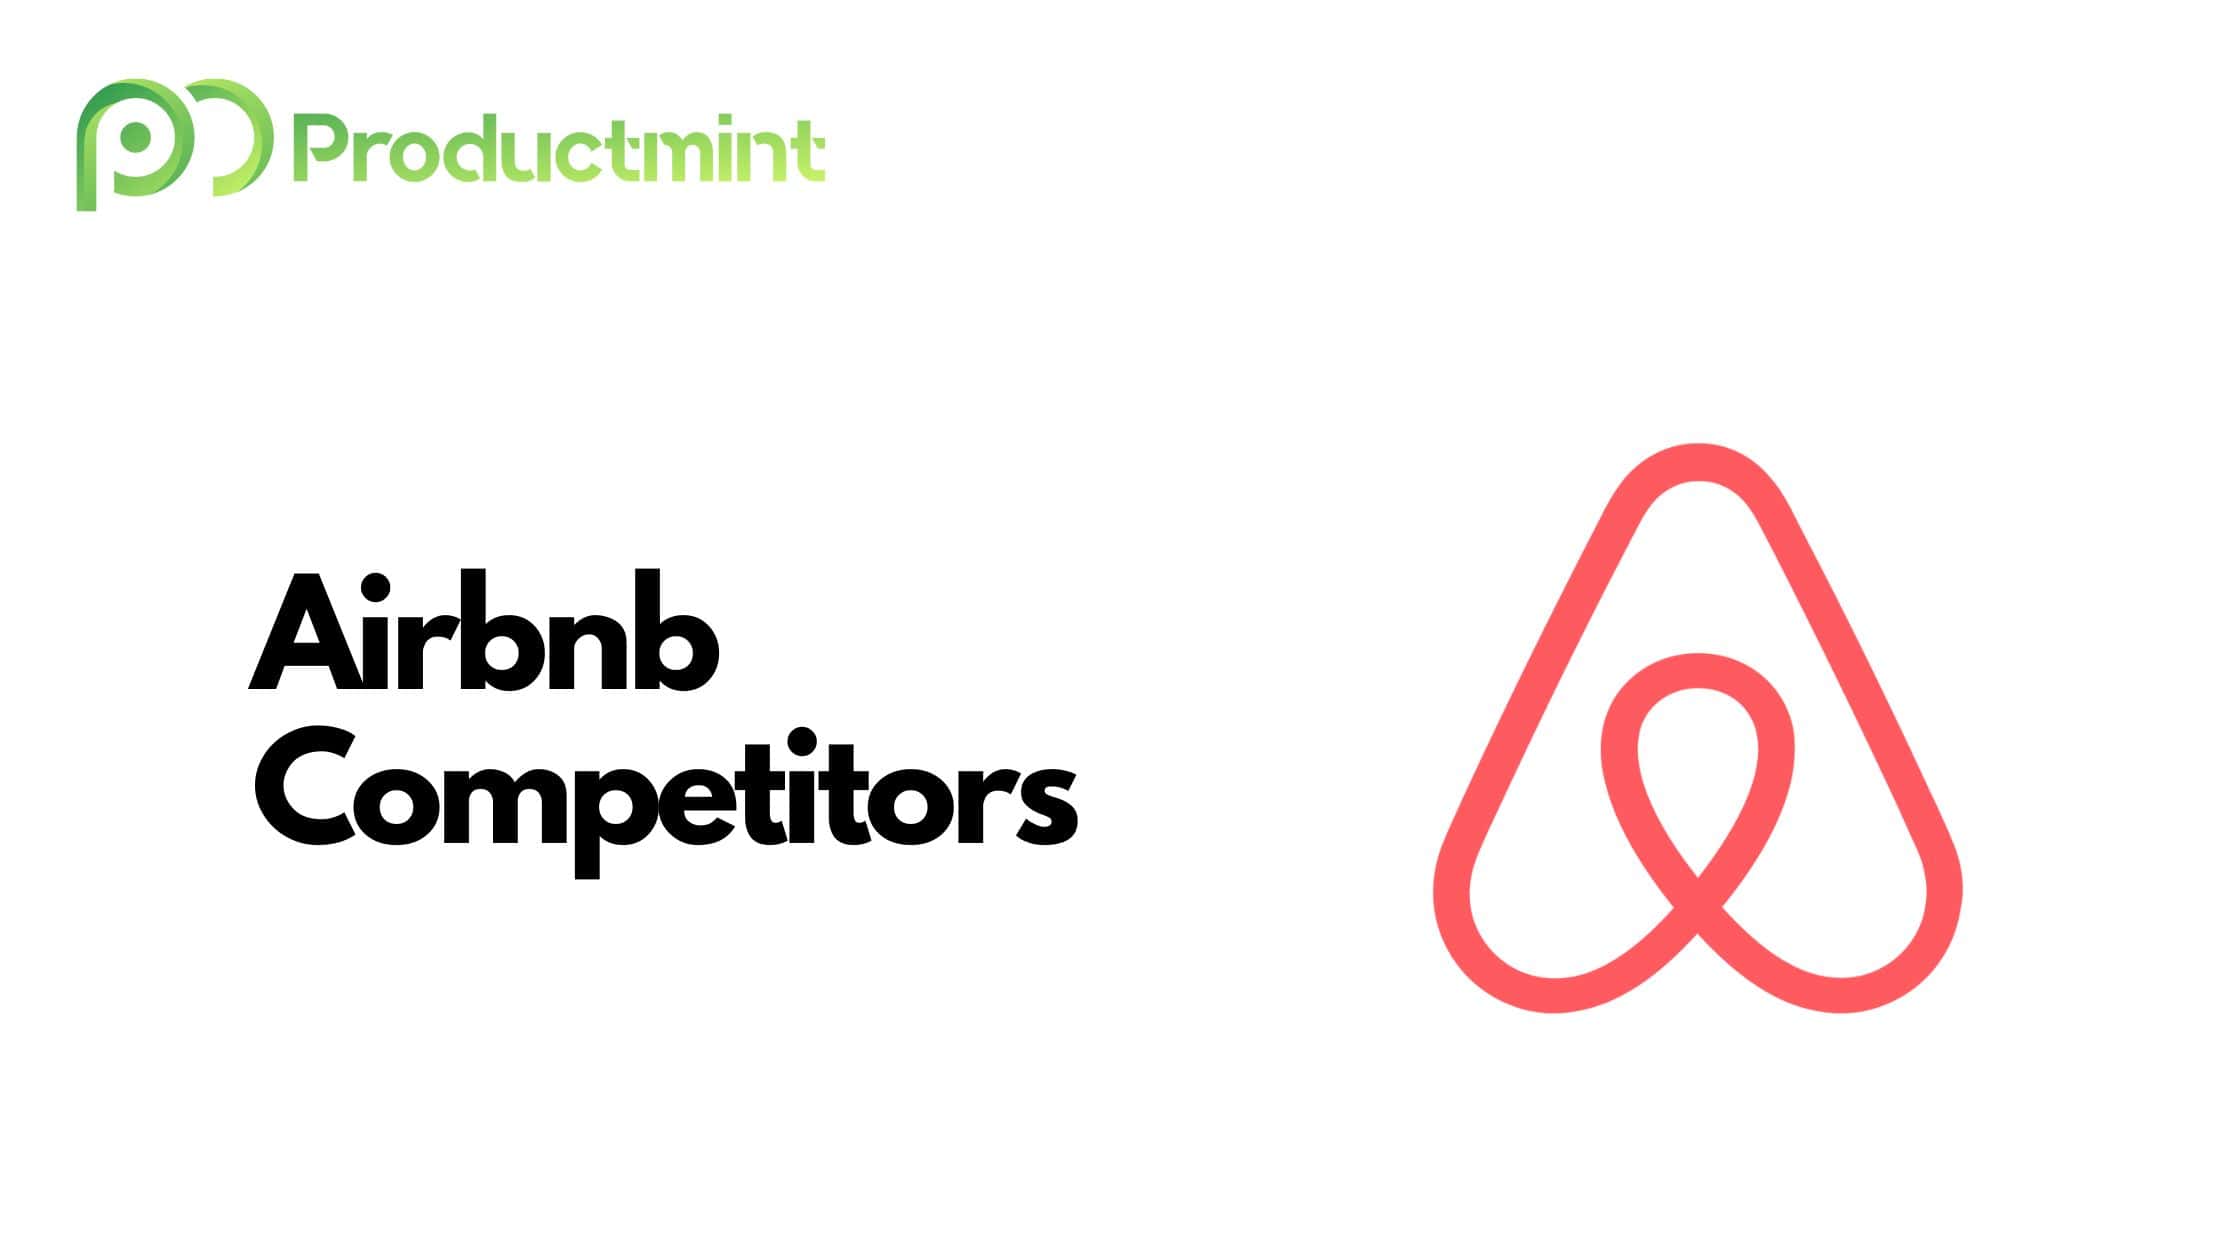 Airbnb Competitors